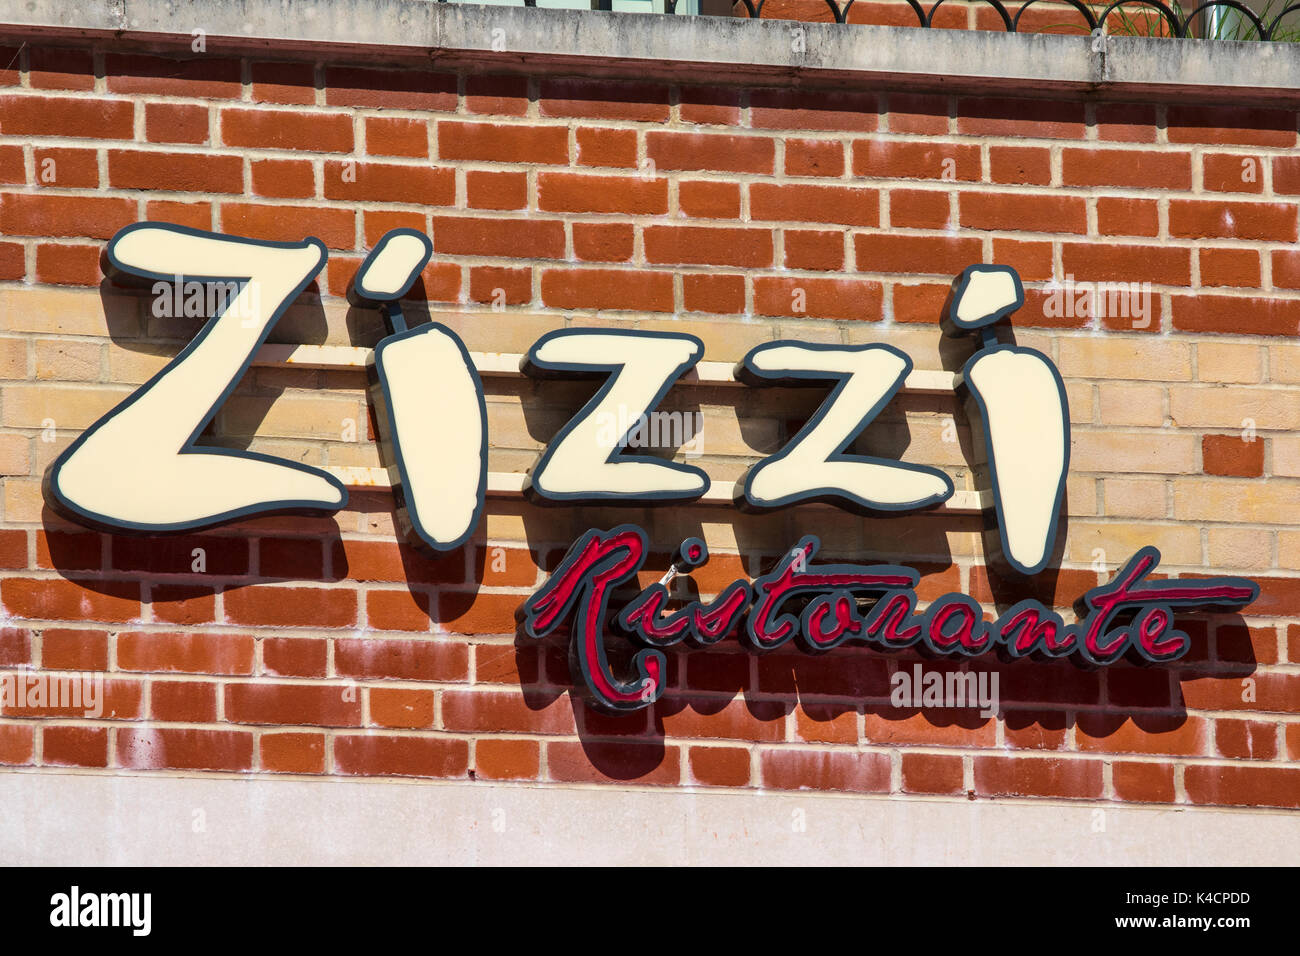 DORCHESTER, UK - AUGUST 15TH 2017: The sign above a Zizzi Italian restaurant in Dorchester, UK, on 15th August 2017. Stock Photo